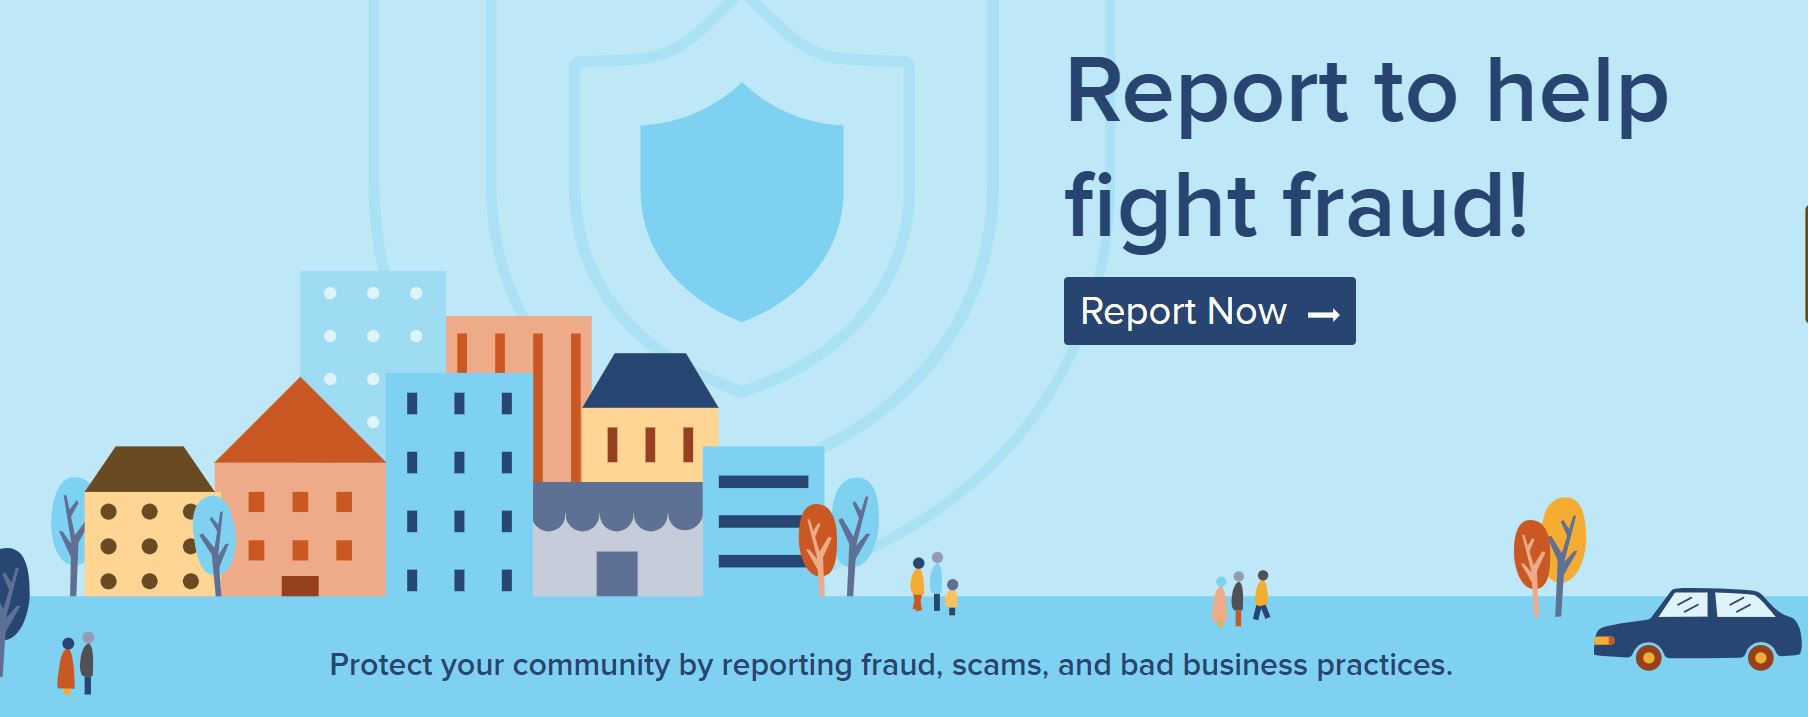 Report to help fight fraud